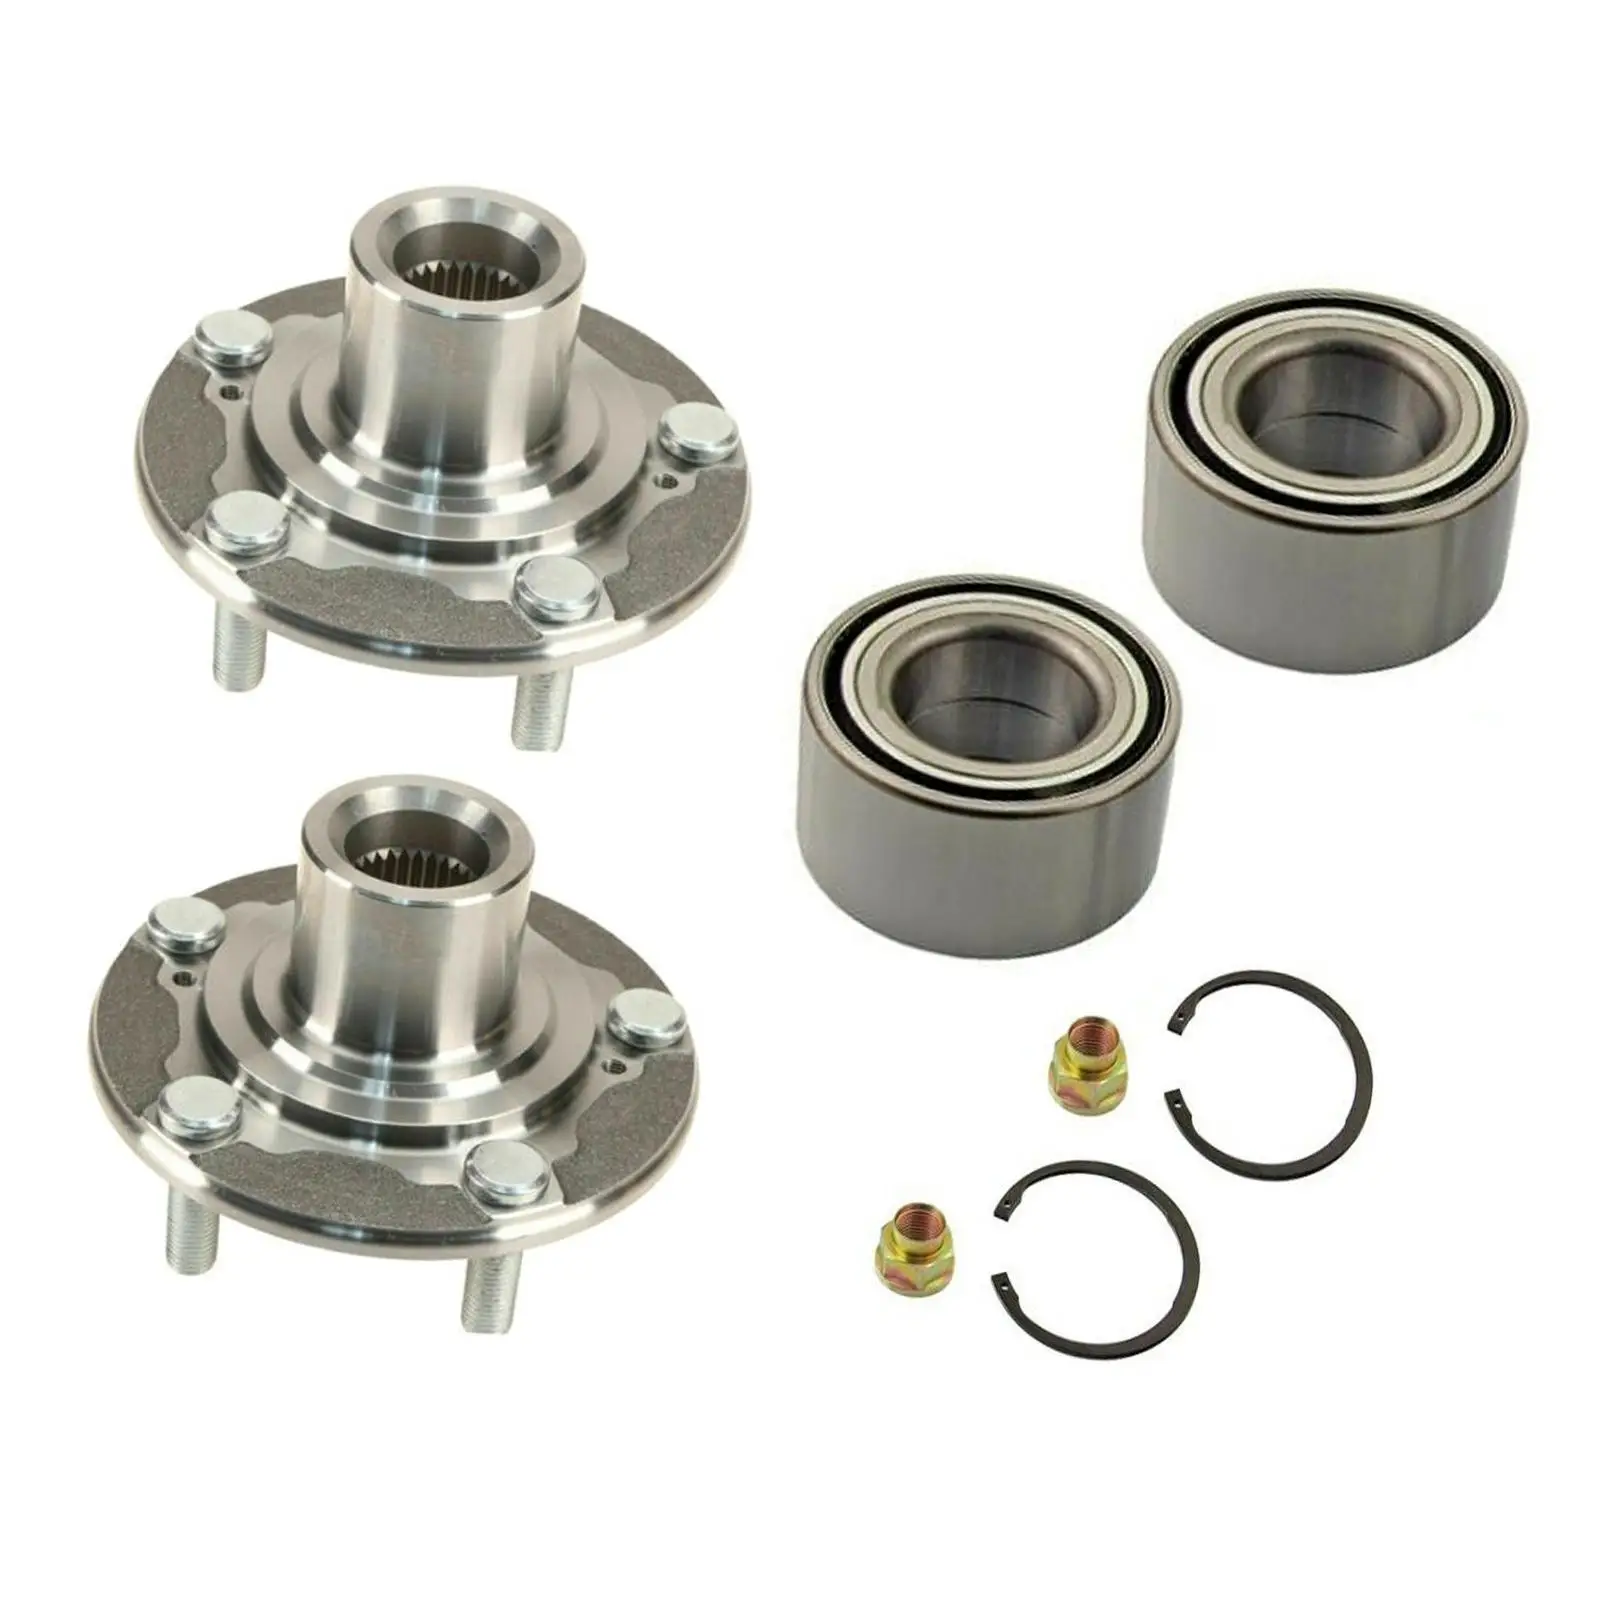 2x Front Wheel Hub and Bearing Repair Kits Professional Easy to Install with Retaining Clips Nuts 510118 for Honda Accord